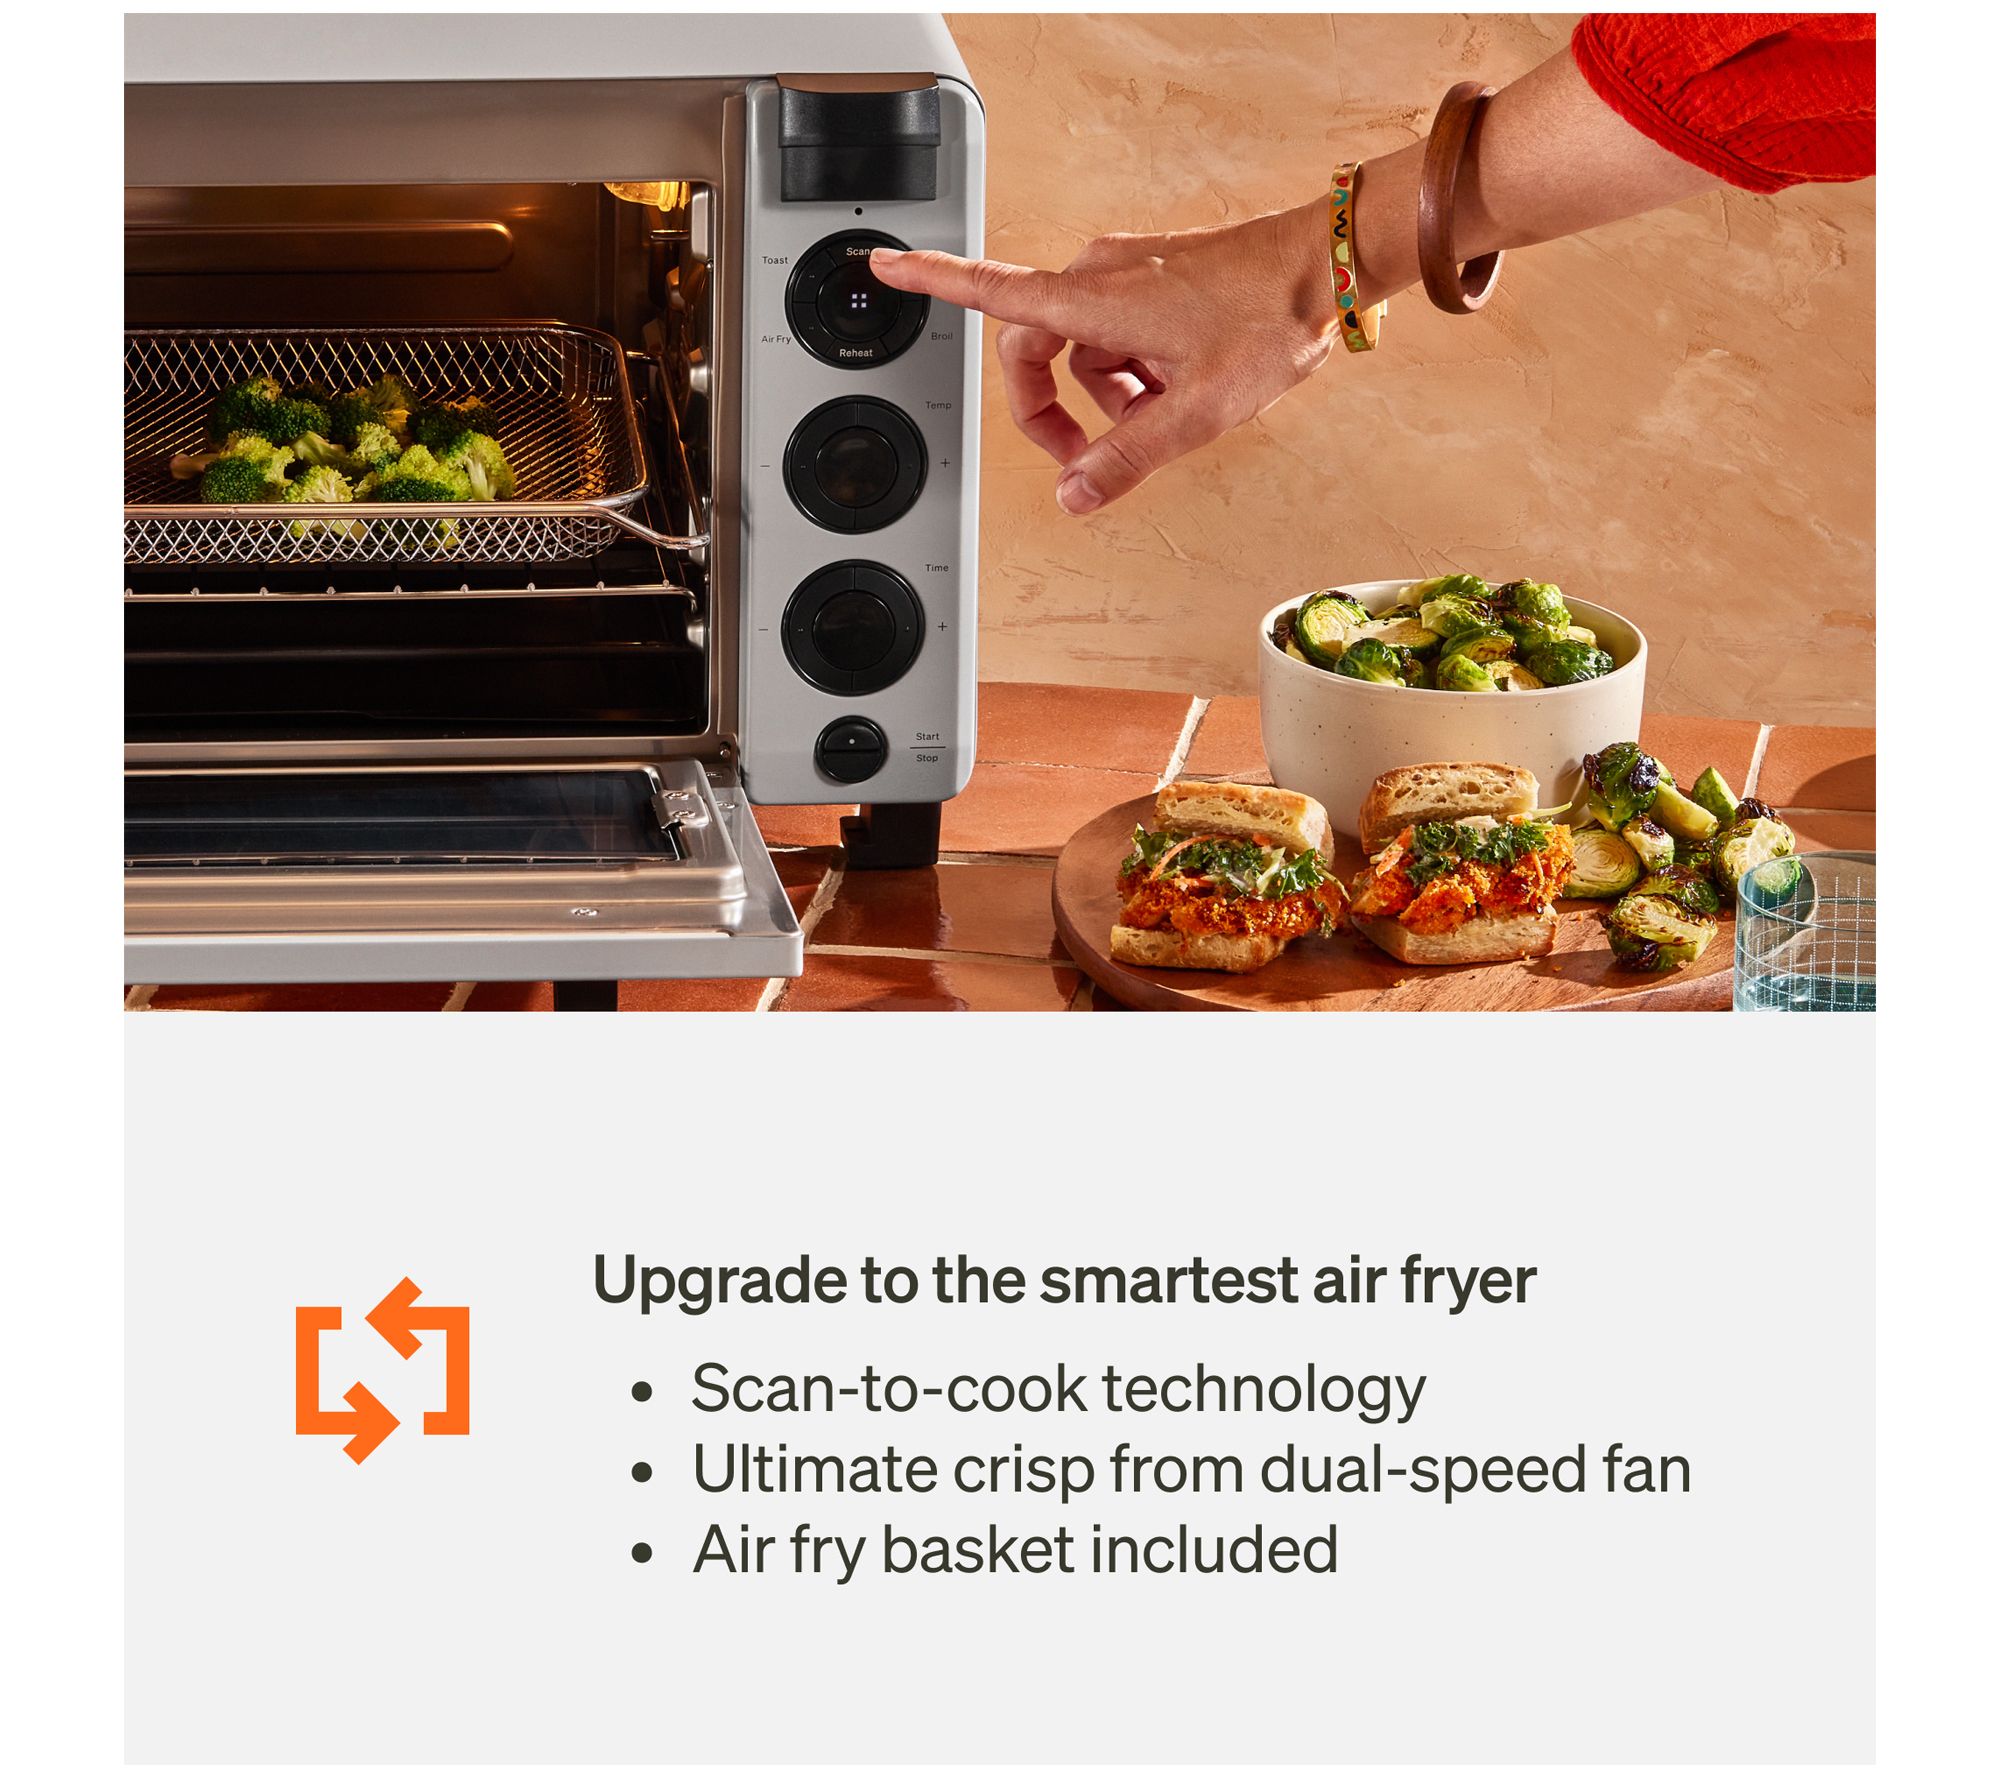 Tovala 5-in-1 Smart Oven with 4-Meal Box + $50 Meal Coupon 